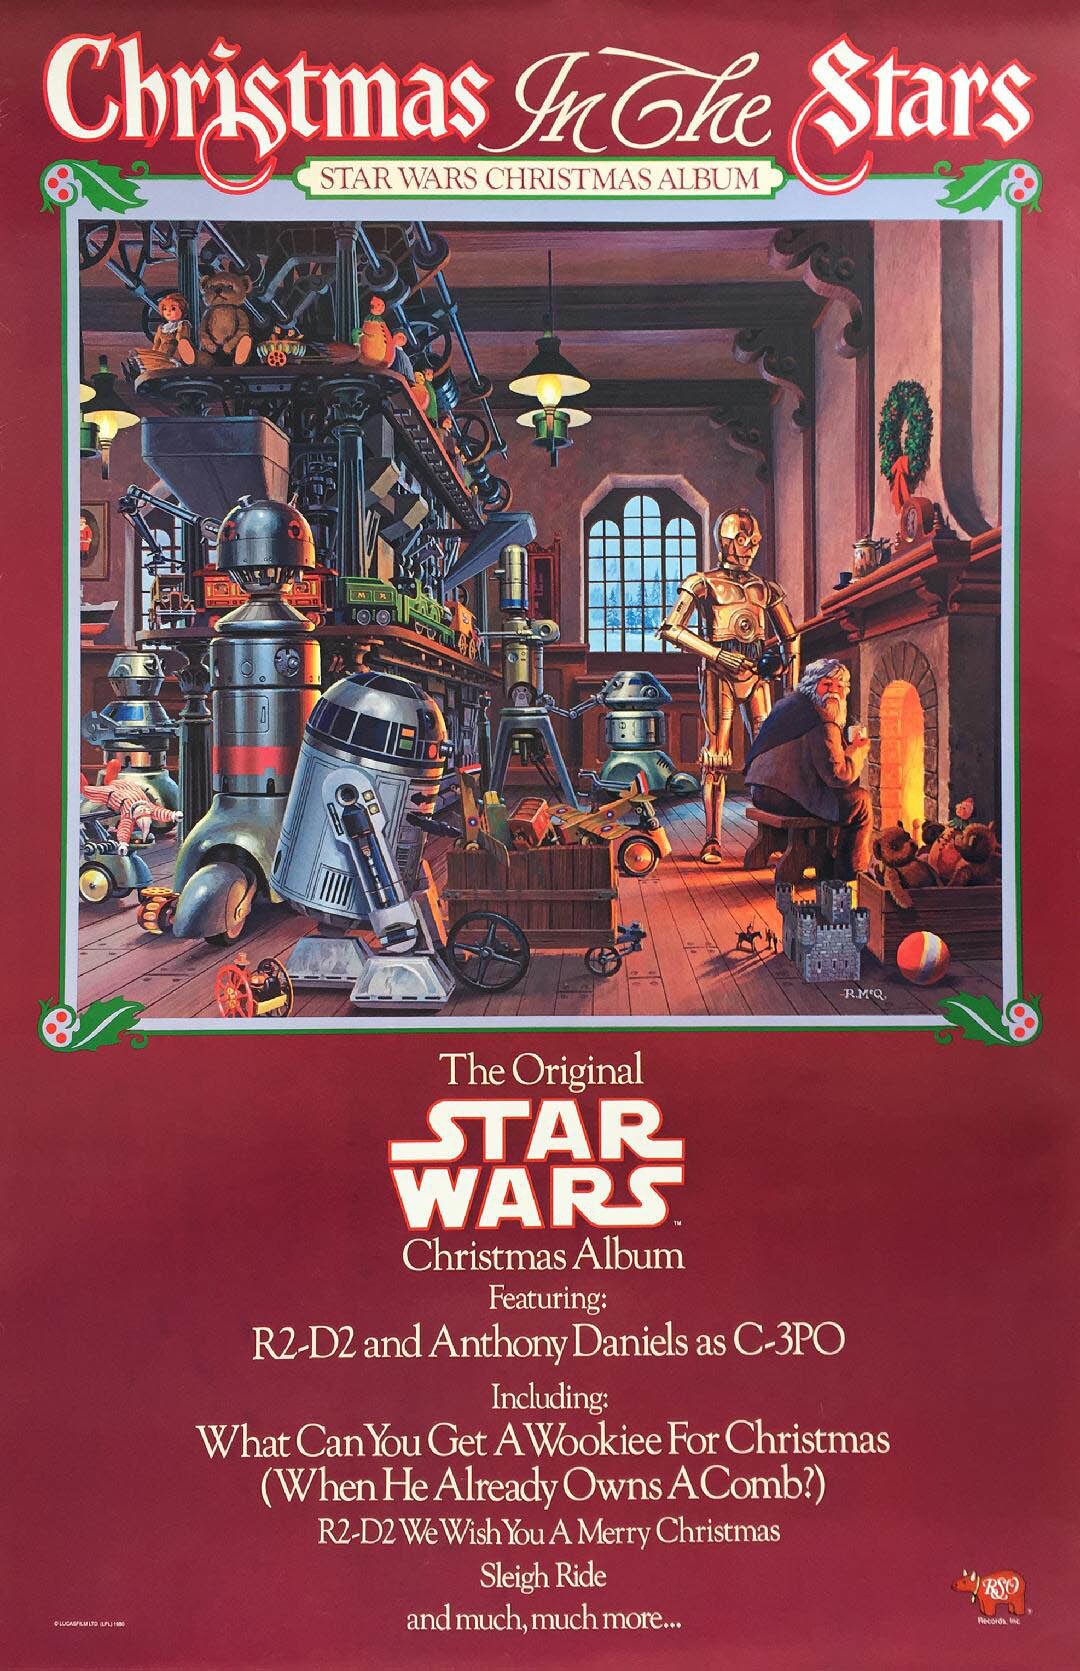 A poster for the album Christmas in the Stars.